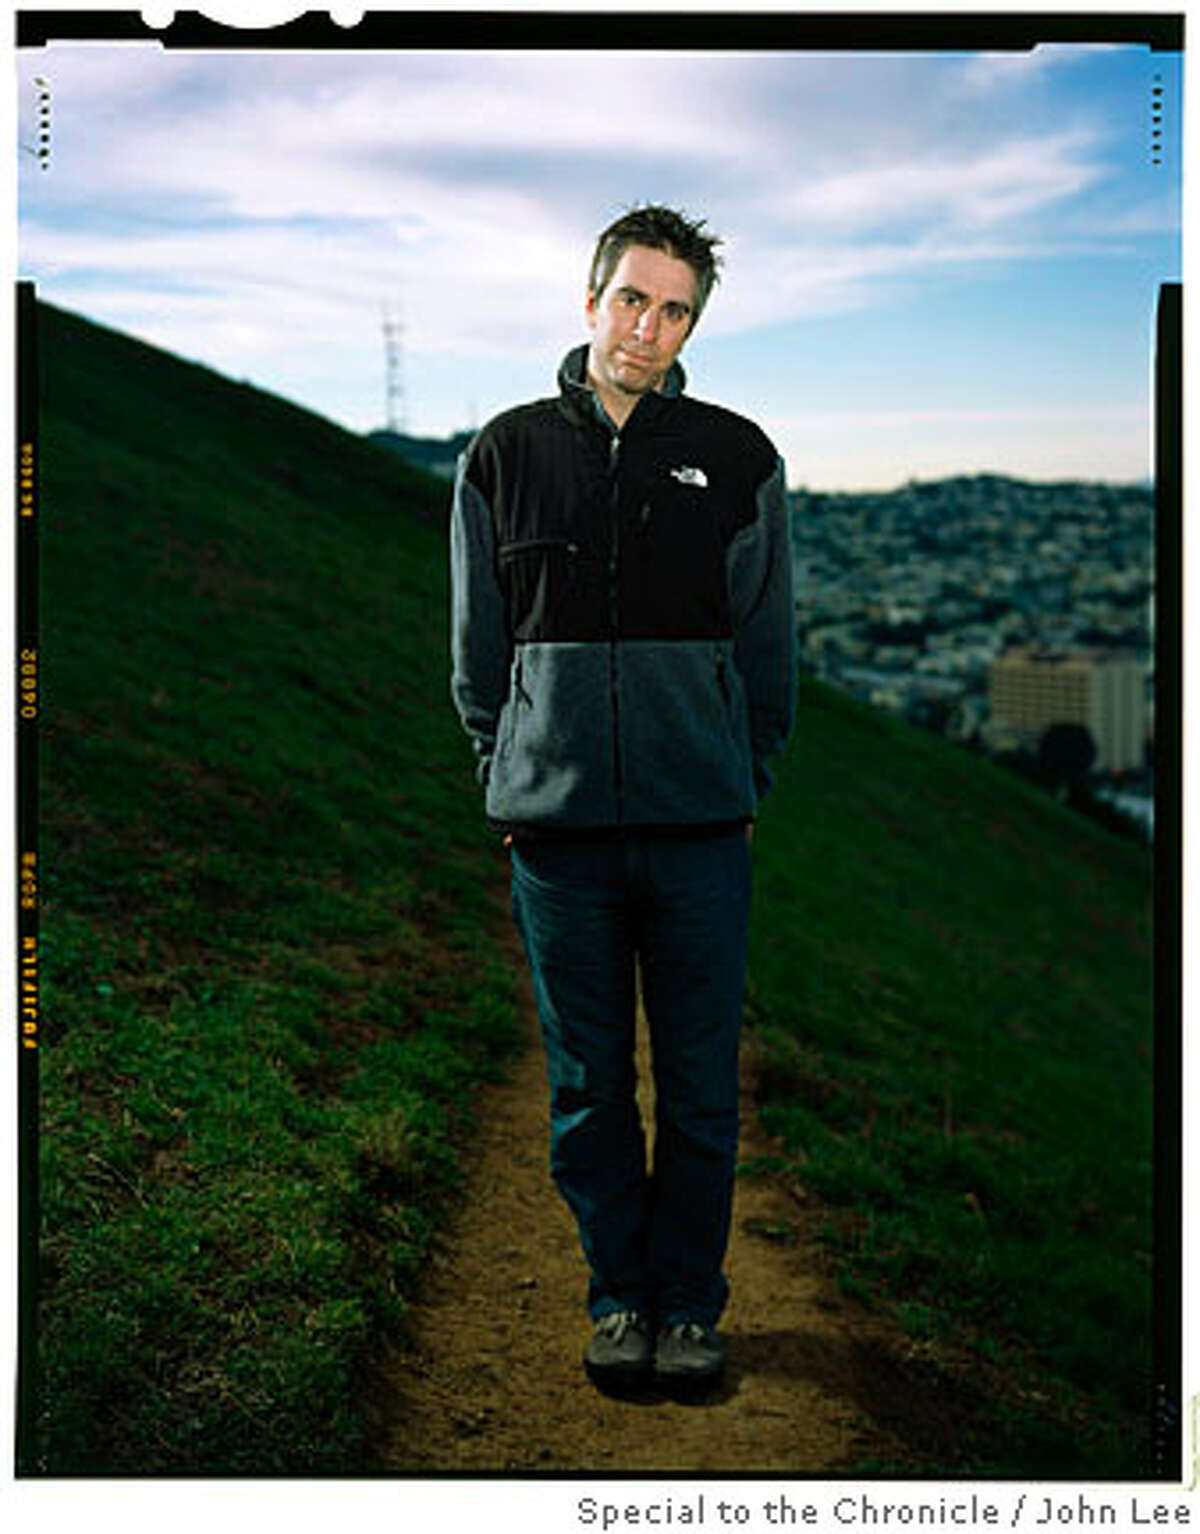 SAN FRANCISCO, CALIF - DEC 12: Environmental activist Adam Werbach (cq), photographed in Bernal Hill Park on December 12, 2007. By JOHN LEE/SPECIAL TO THE CHRONICLE Ran on: 01-06-2008